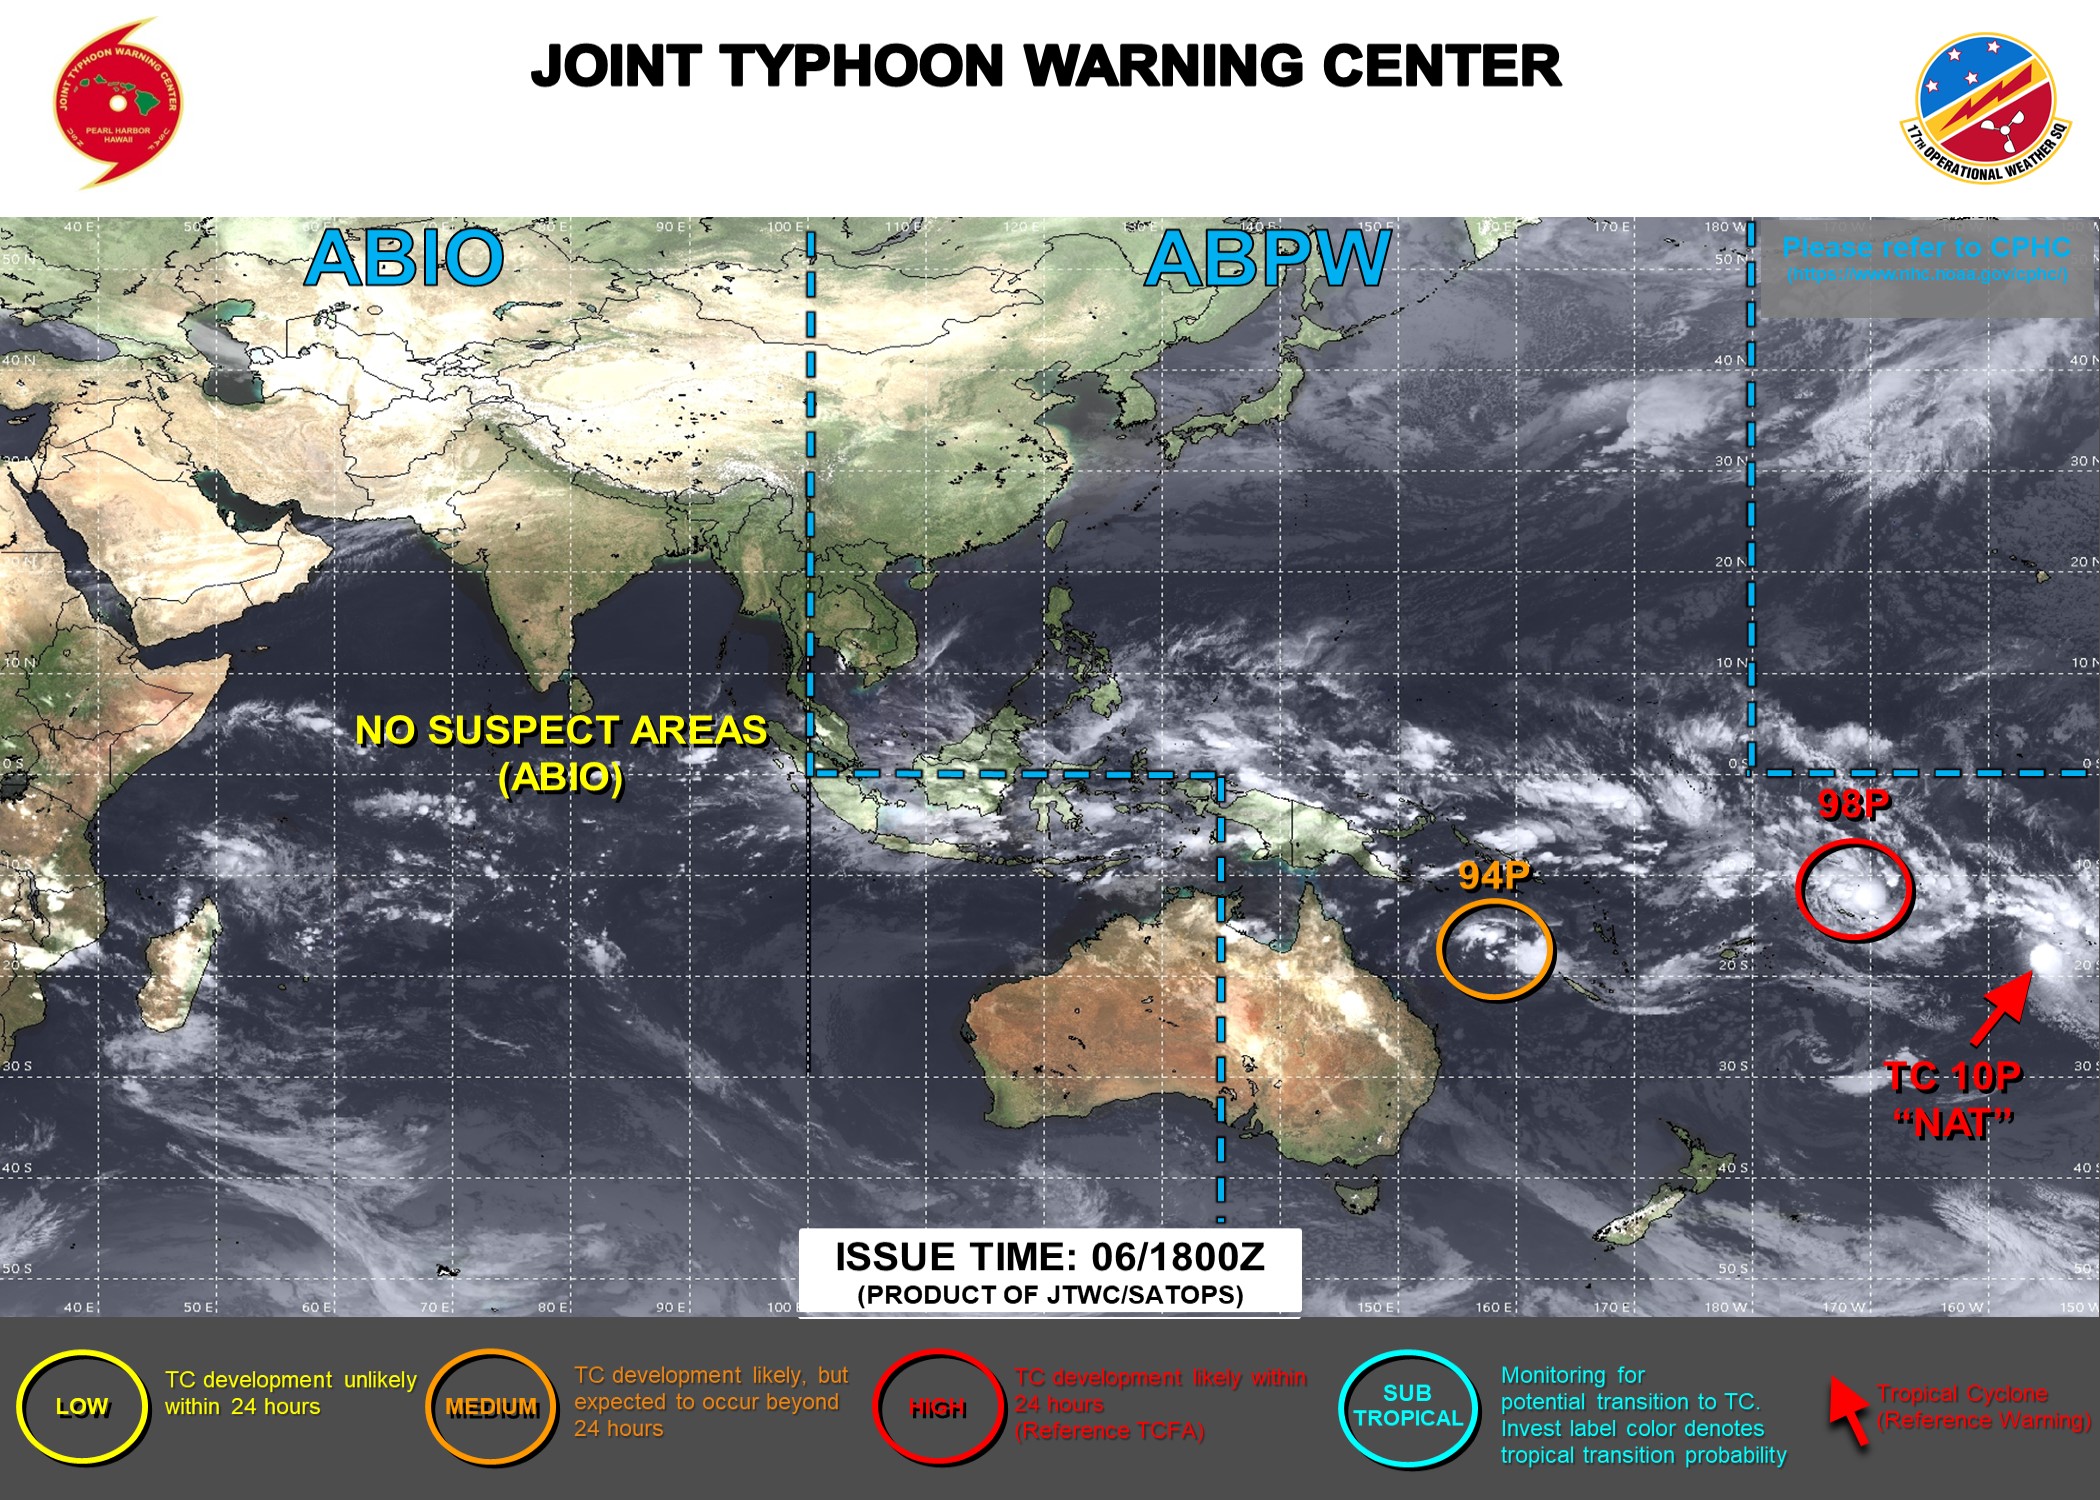 JTWC IS ISSUING 12HOURLY WARNINGS AND 3HOURLY SATELLITE BULLETINS ON TC 10P(NAT). 3HOURLY SATELLITE BULLETINS ARE ISSUED ON INVEST 94P.